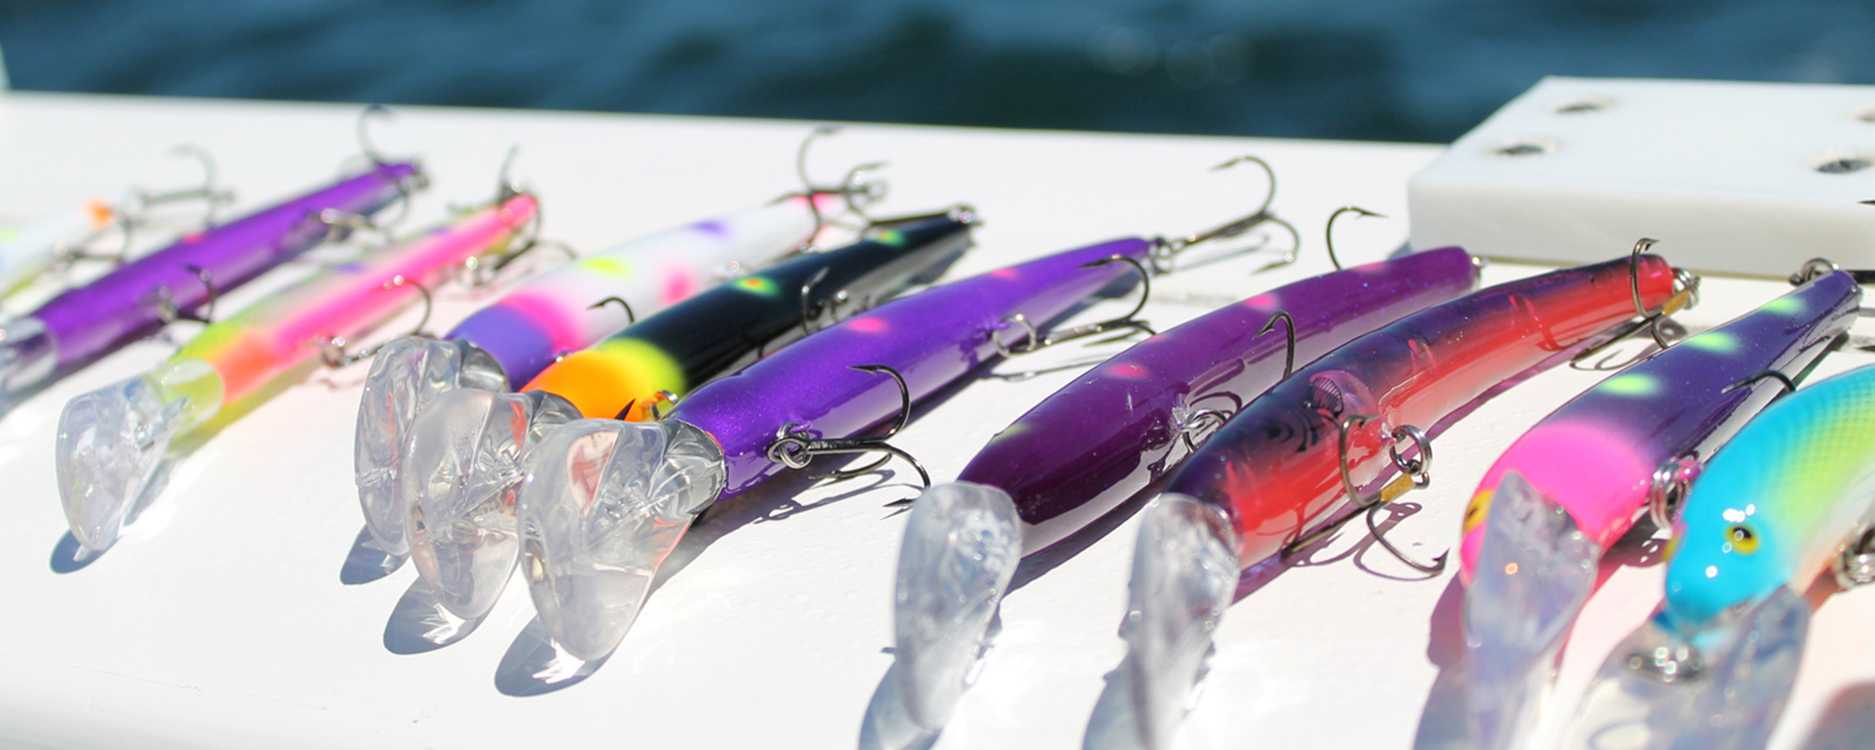 The Best Walleye Lures for a Successful Fishing Trip